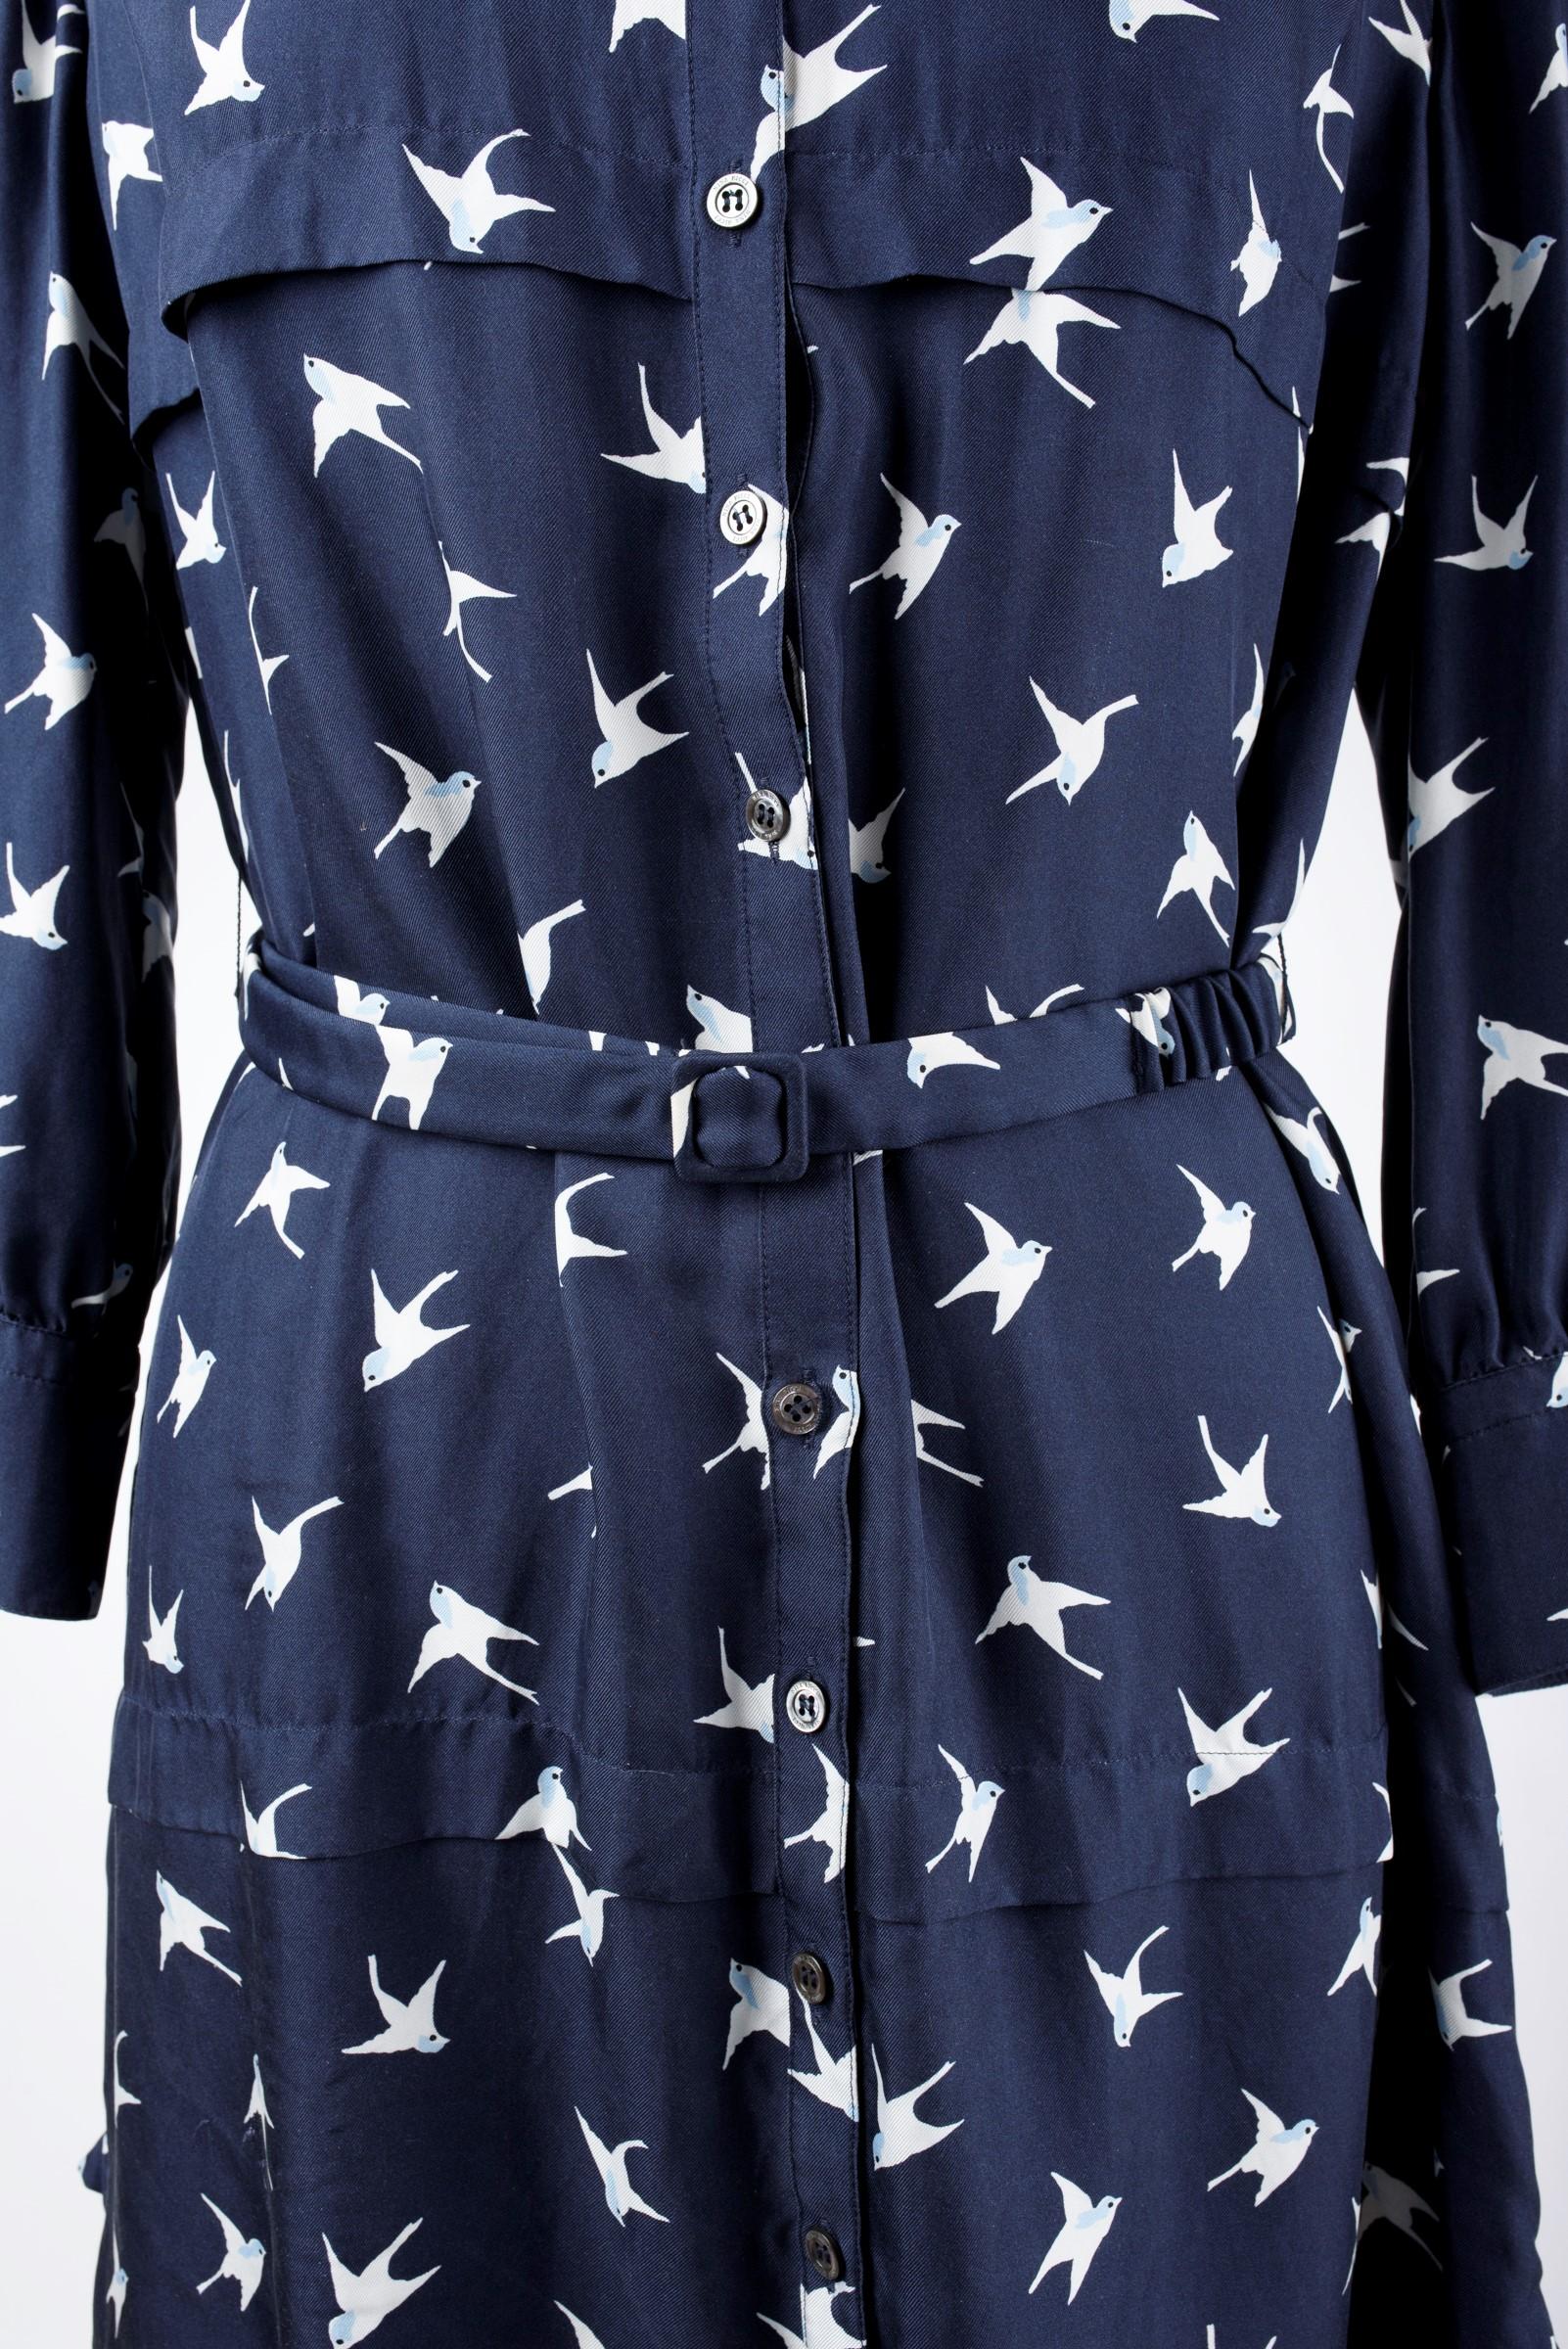 Women's A Blouse dress in navy silk printed with swallows by Nina Ricci Circa 2000 For Sale